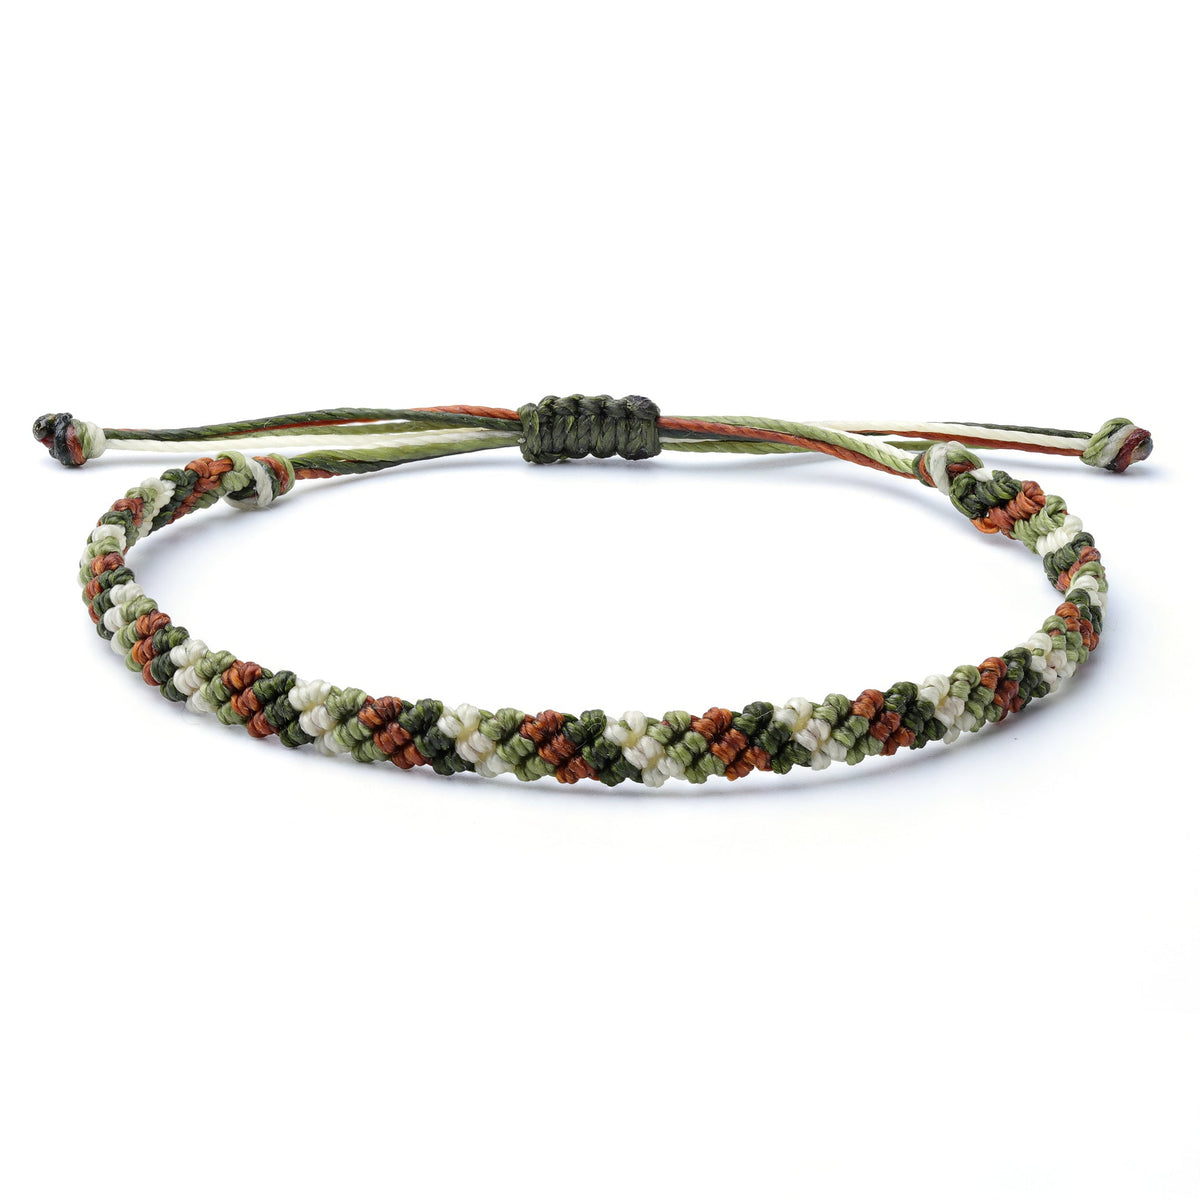 Multi Color Braided Waterproof Bracelet with wax coated thread, colors green, brown, white